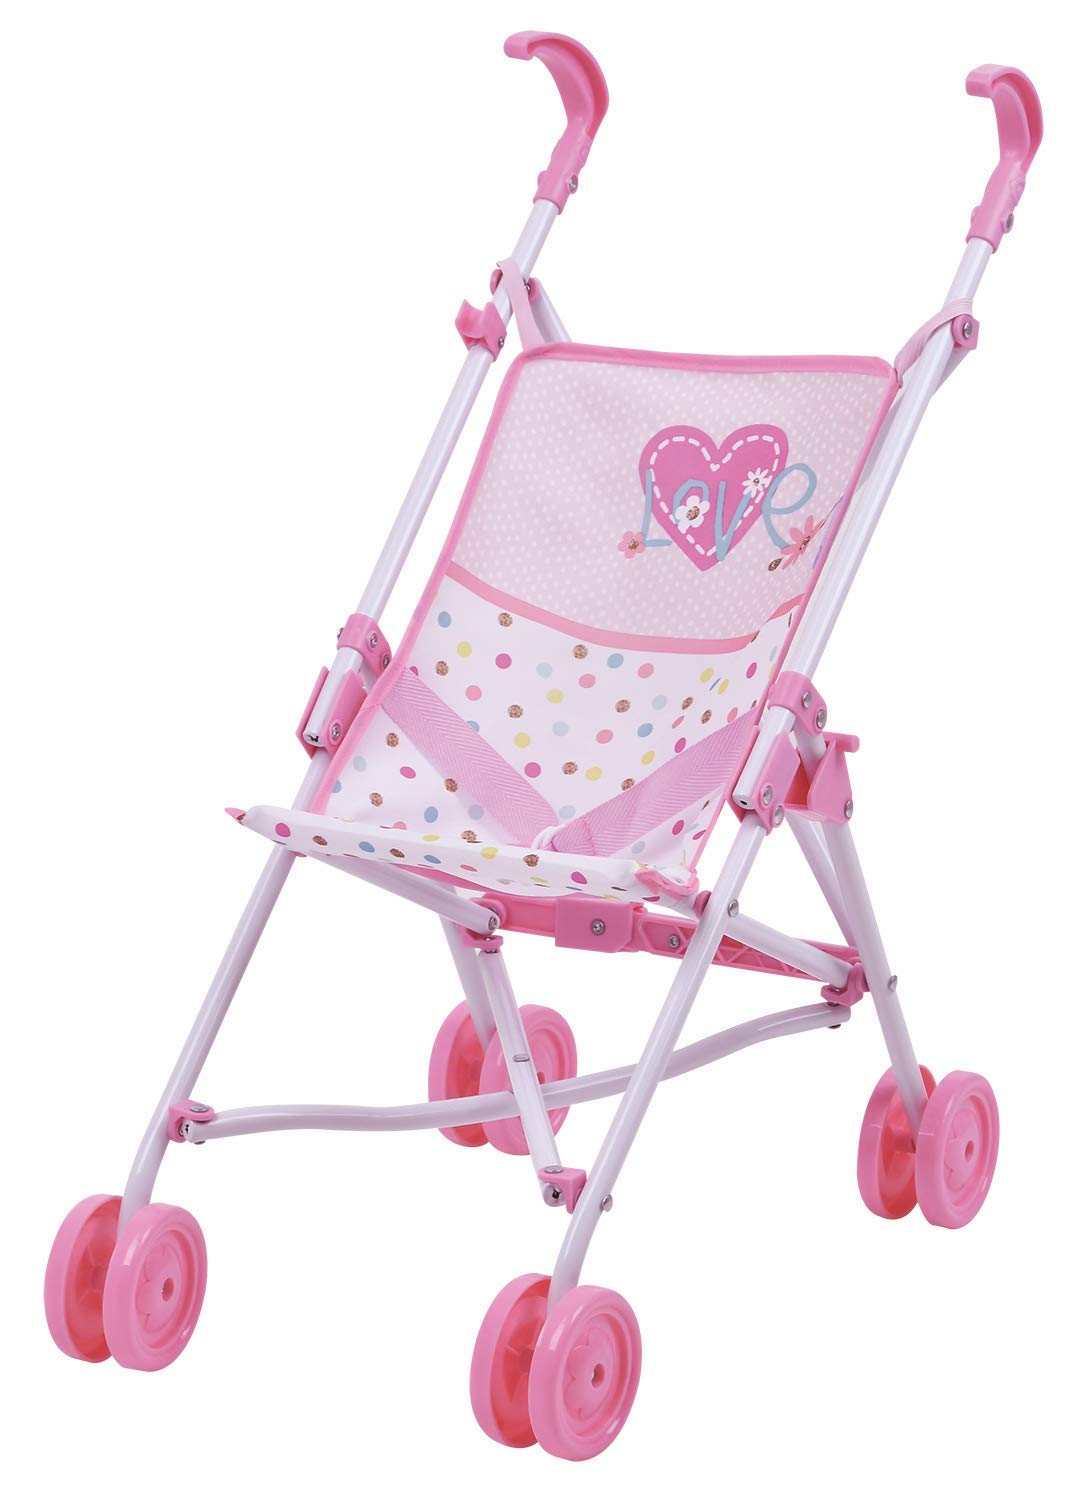 Hauck Love Heart Doll Umbrella Play Stroller, Carry Baby Doll or a Favorite -Stuffed Animal Friend, Toy Fits Dolls Up to 18 inches, Great Gift for Push Around Caring Play, Kids Ages 3 and Up